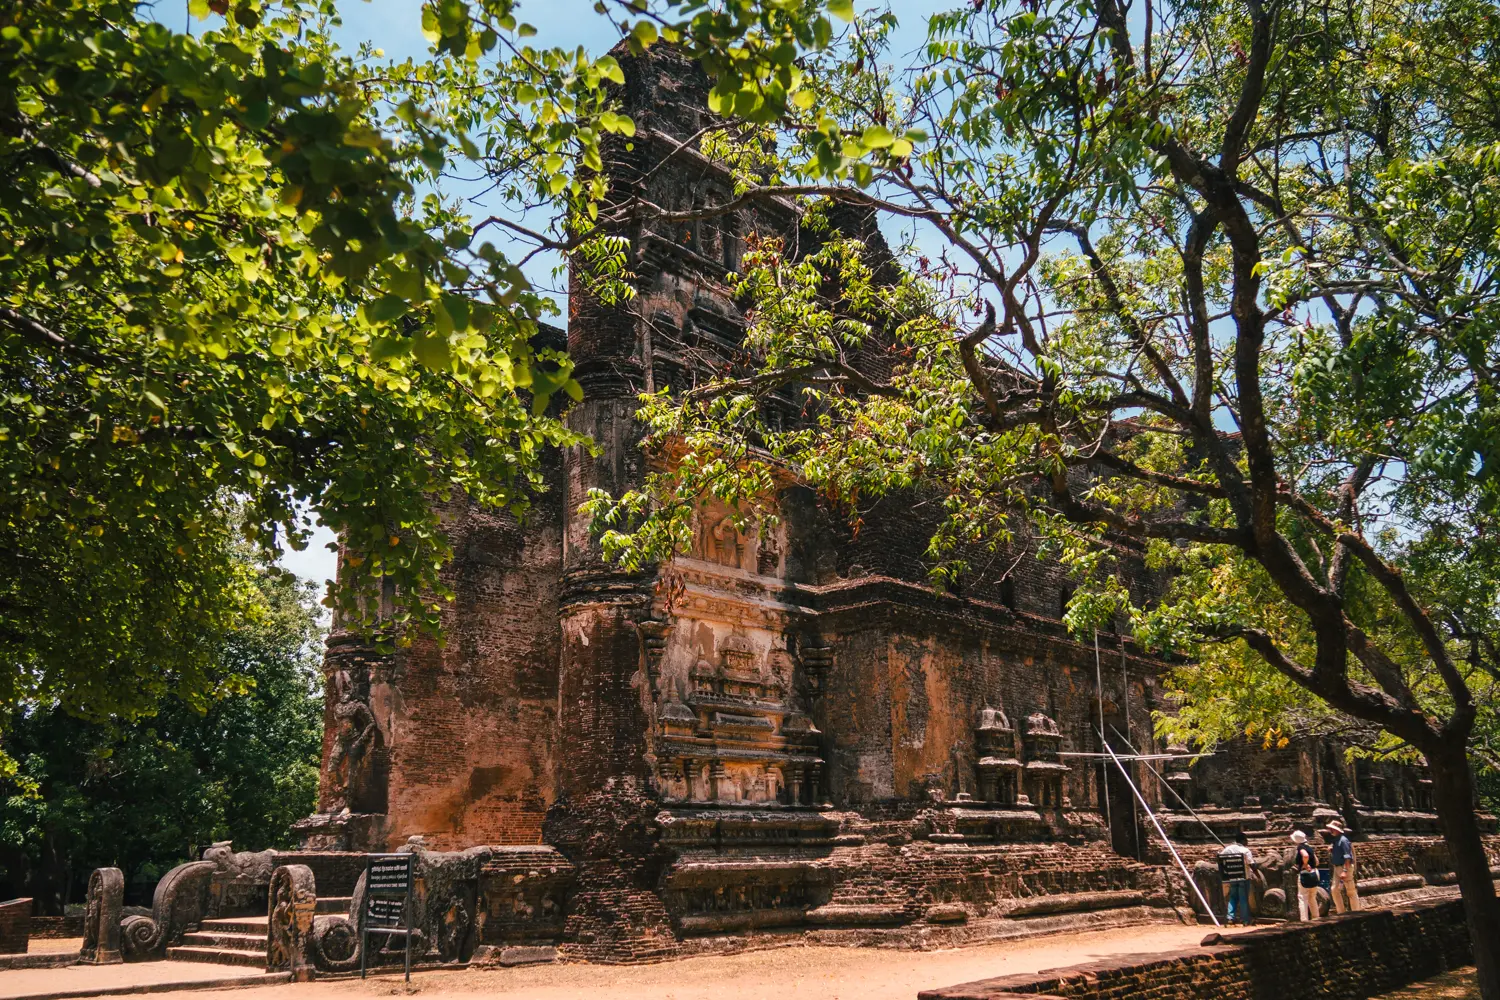 The ornate brown brick ruins of Lankatilaka seen through green trees with three people looking up at it in Polonnaruwa.